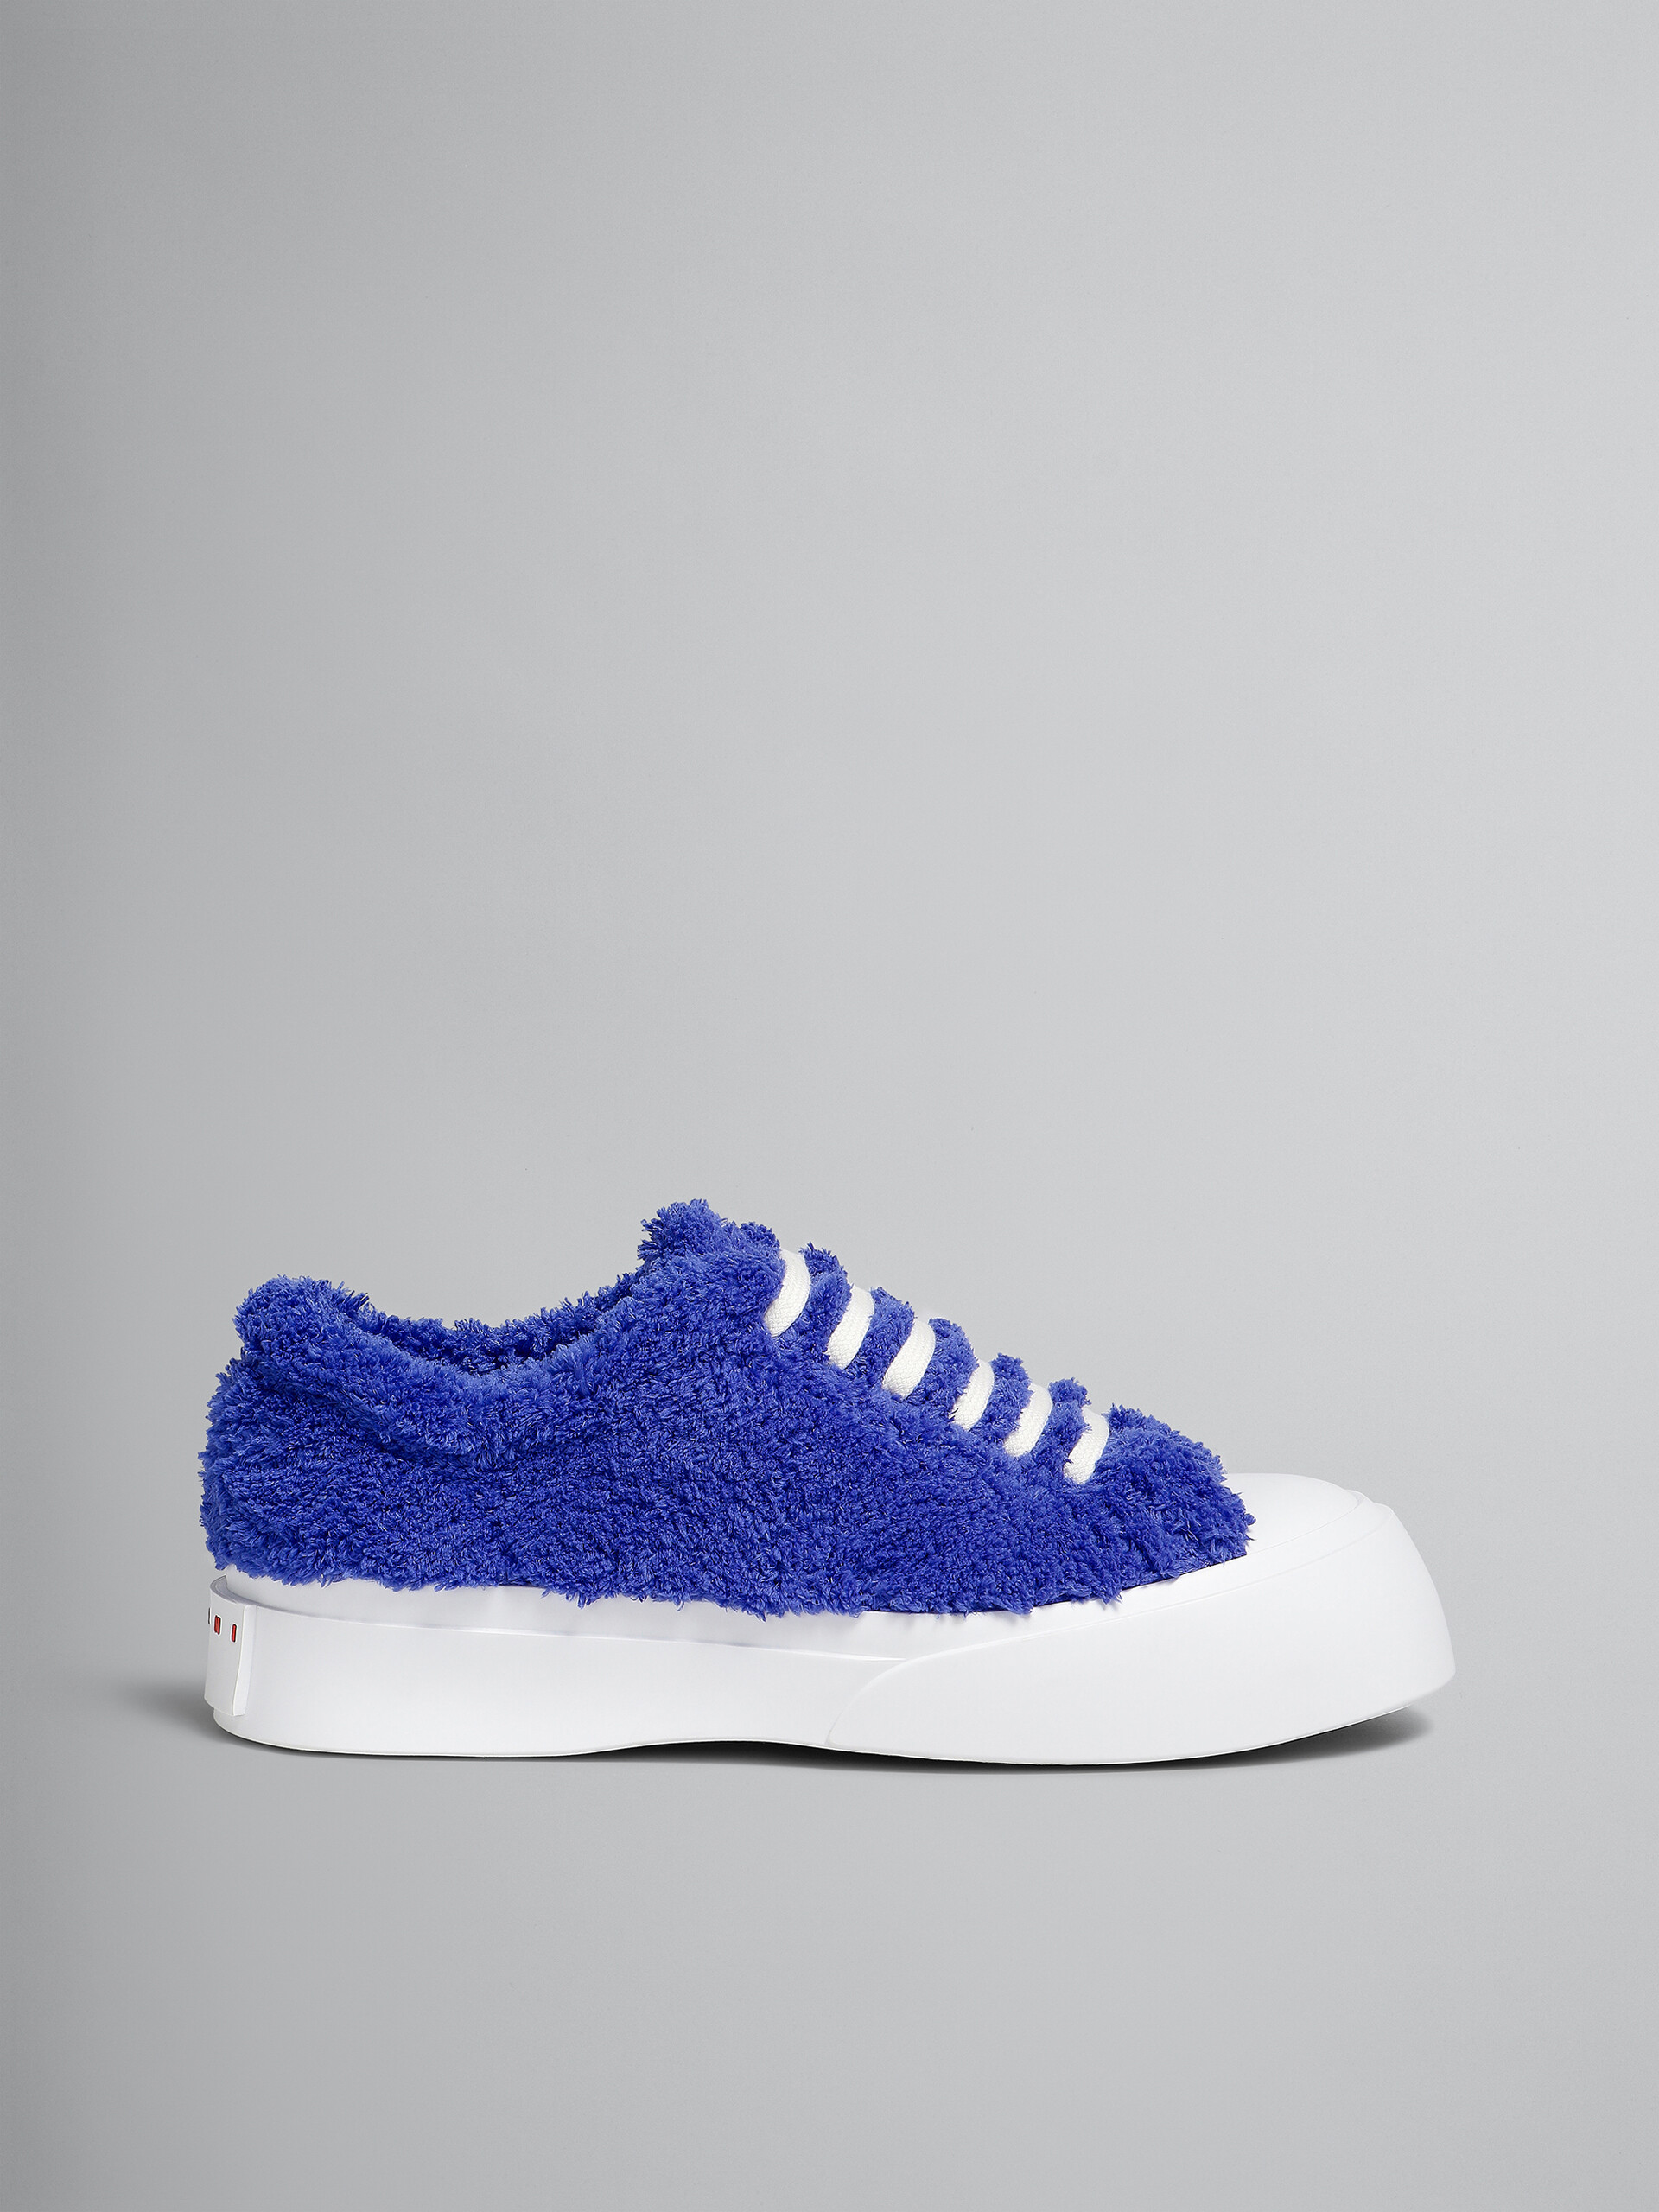 Blue Terry Pablo lace-up sneaker - Sneakers - Image 1